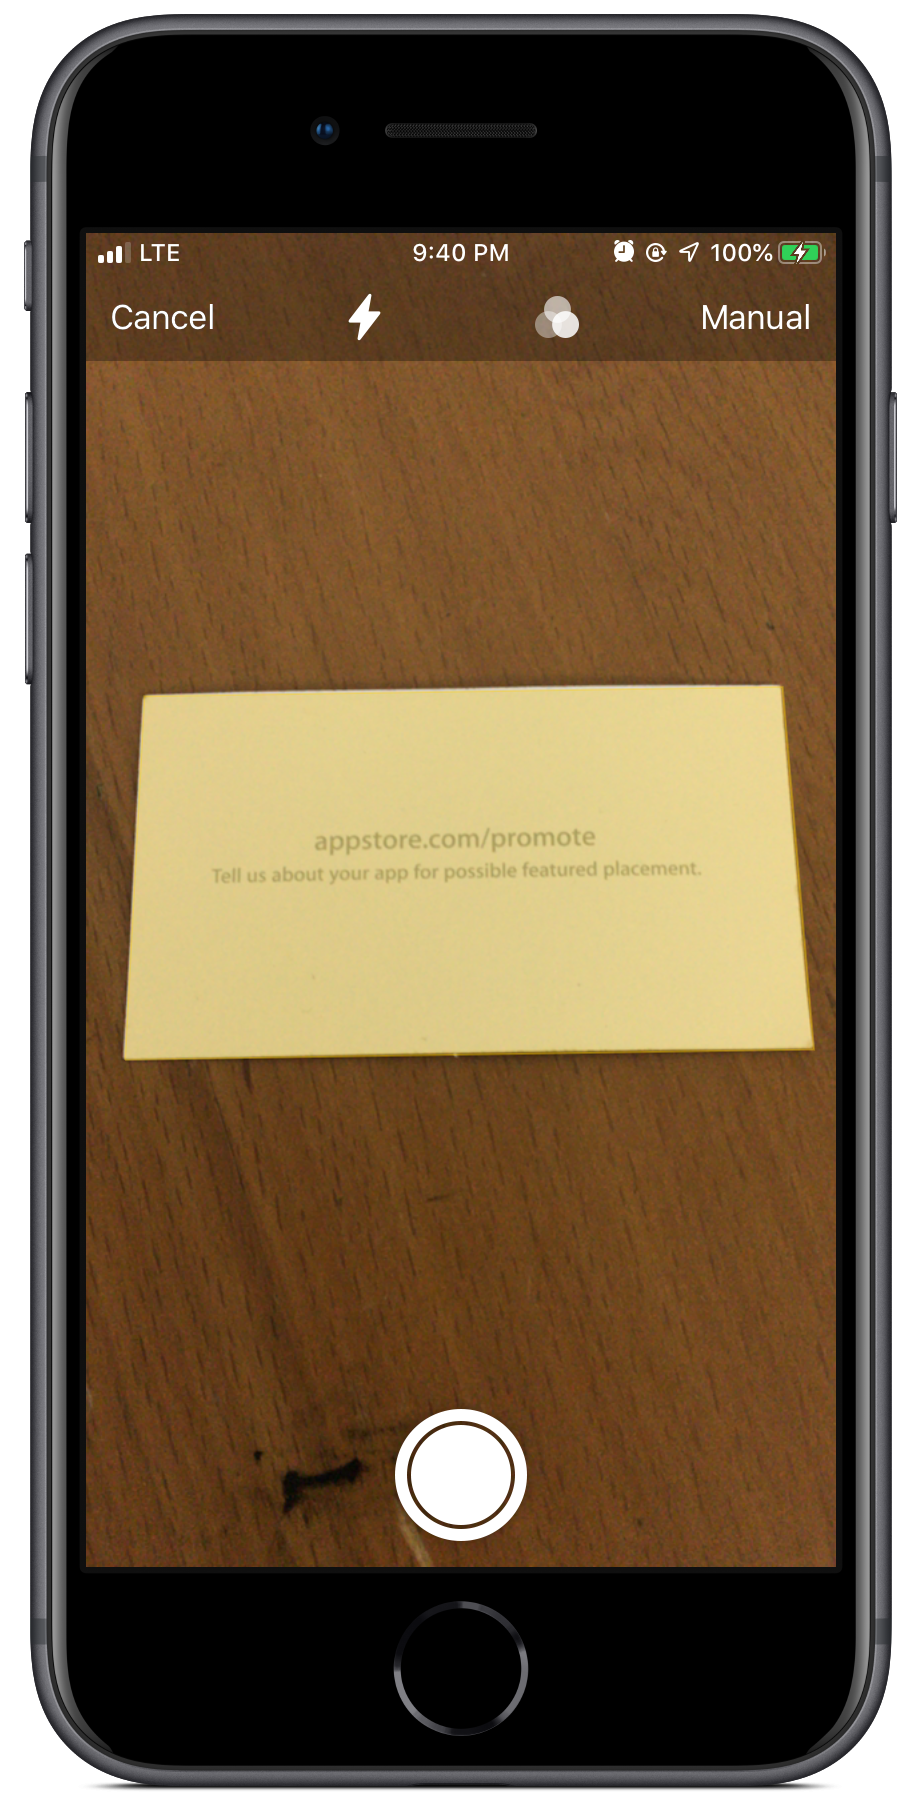 iPhone 8 displaying the iOS document scanner which is focused on a business card that says appstore.com/promote - tell us about your app for possible featured placement